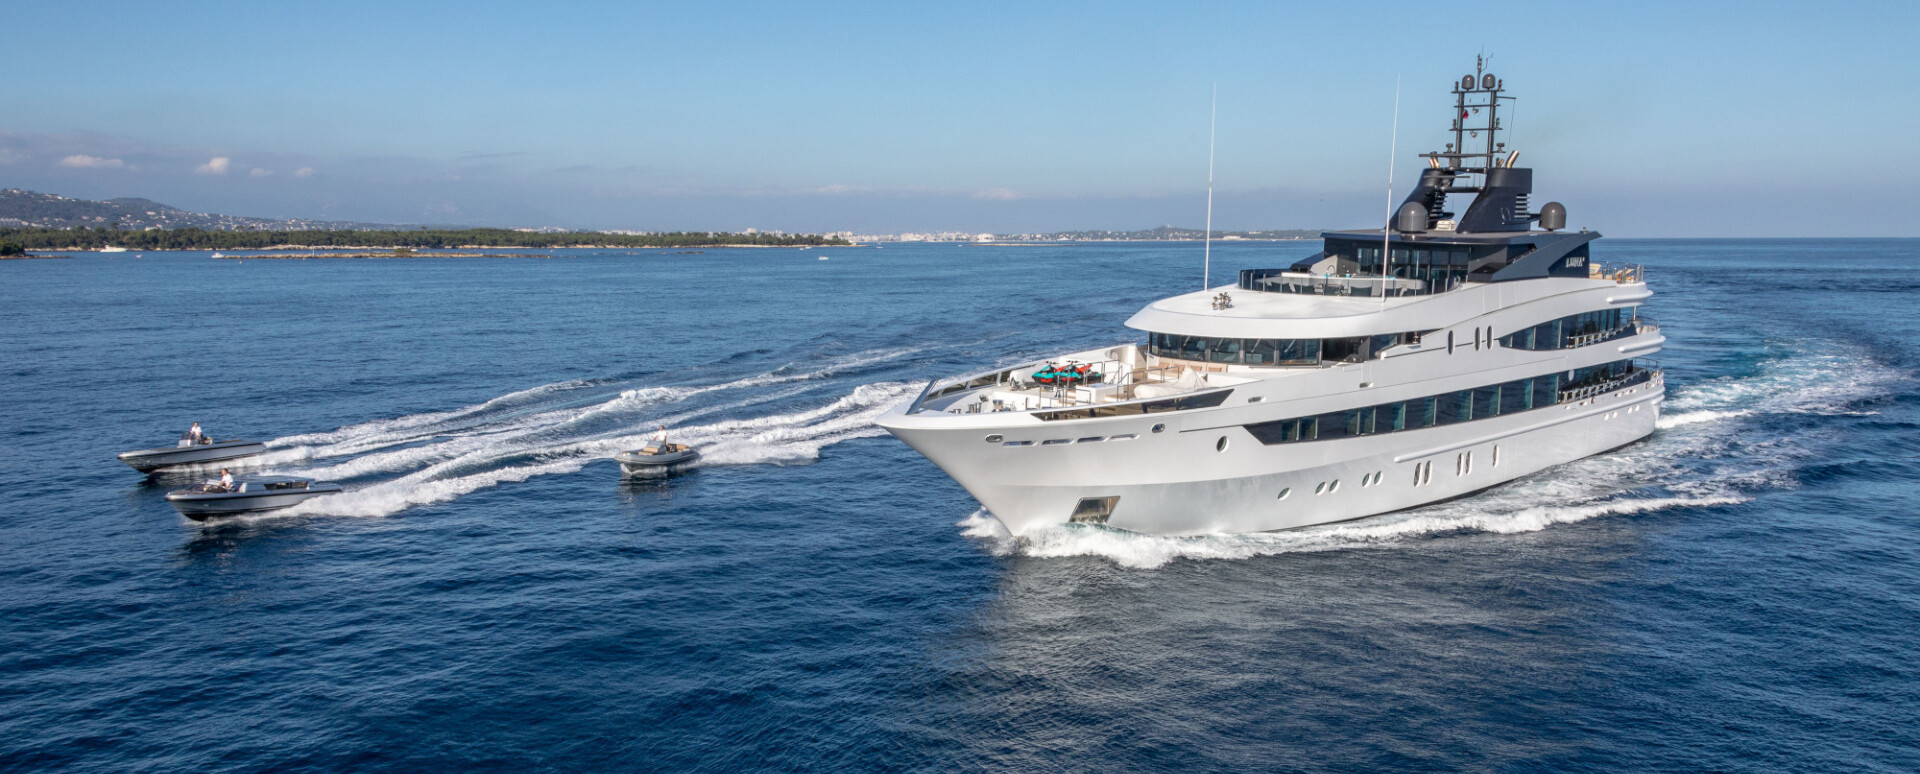                                                                                                     M/Y LUNA B also available for longer term Charters this season.
                                                                                            